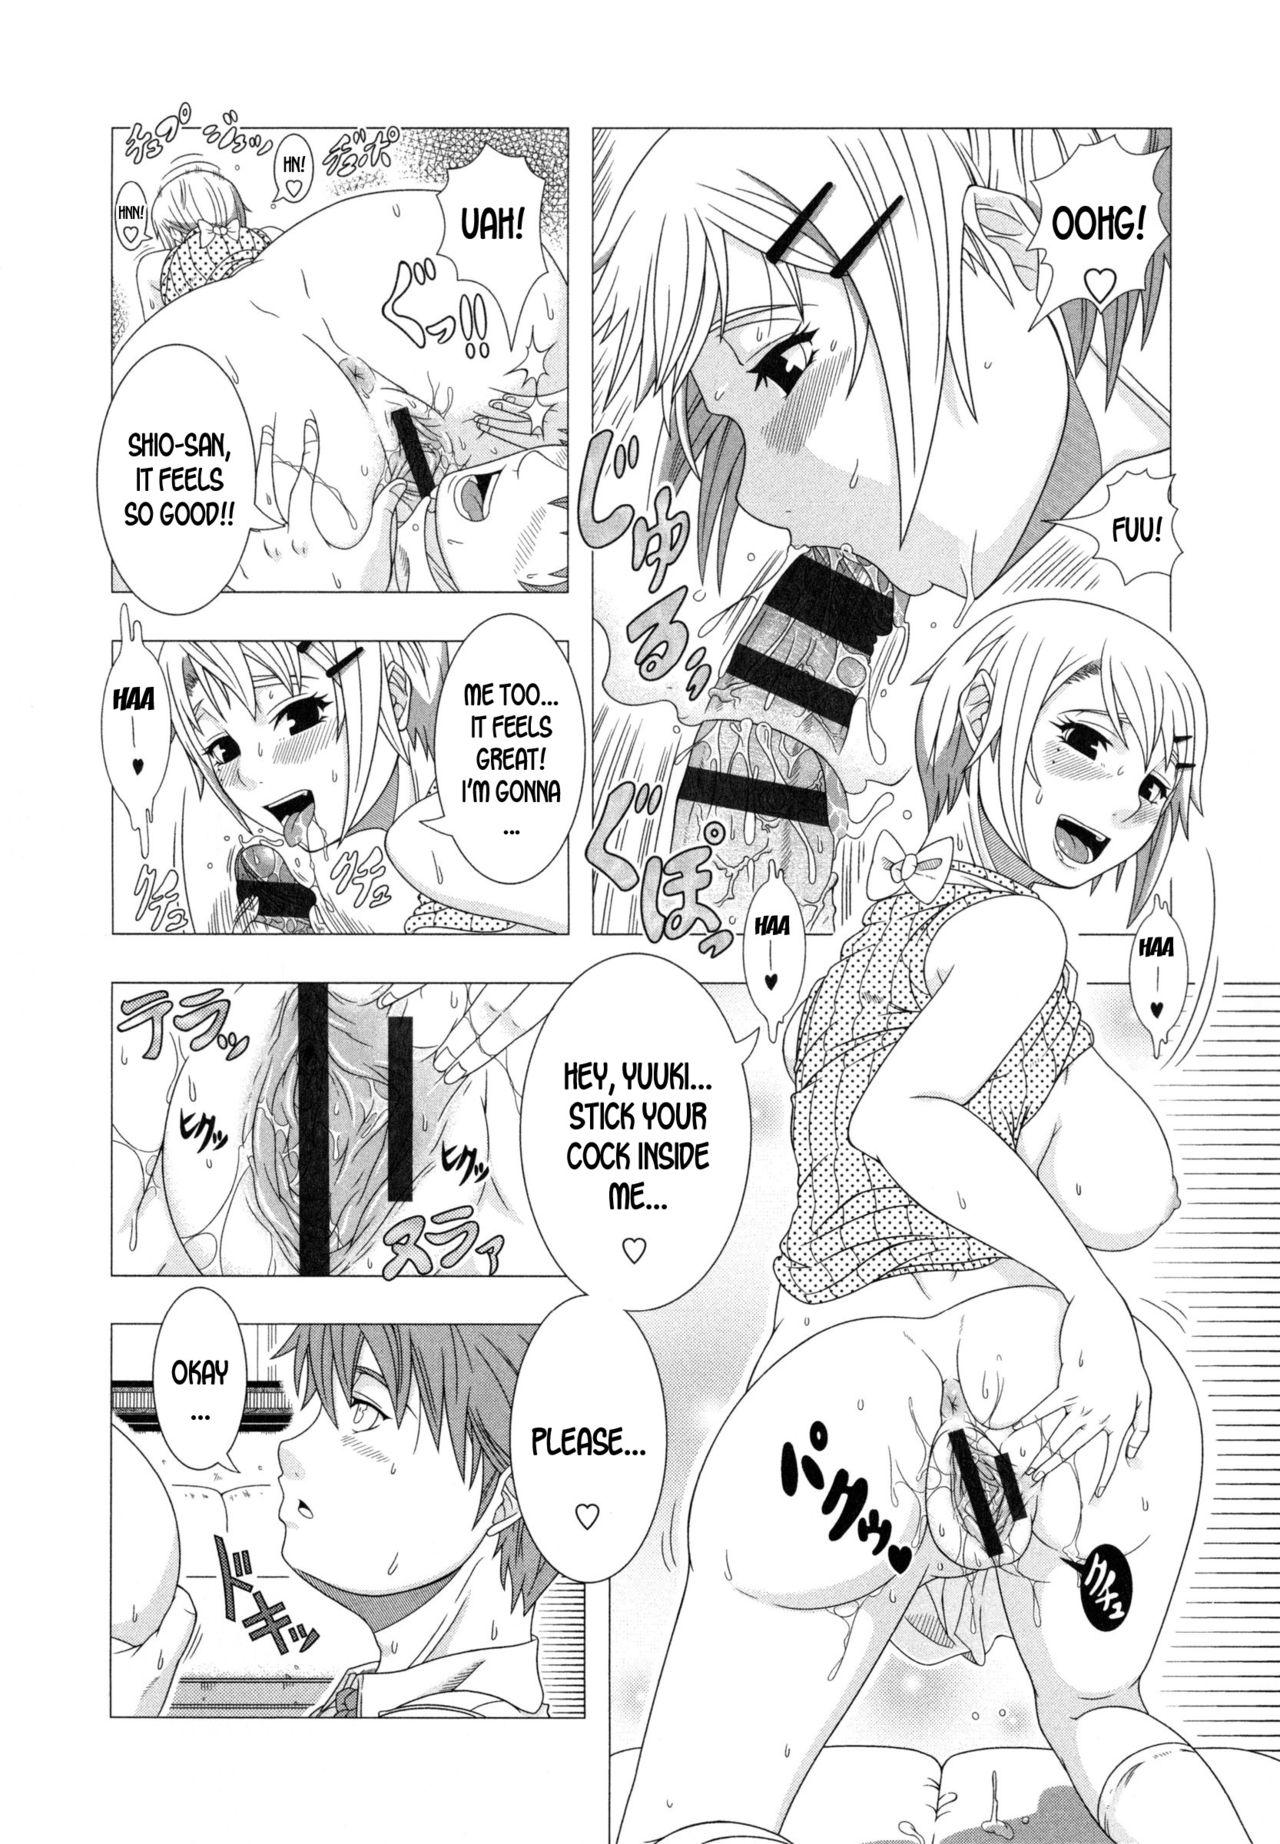 Cogiendo Futari no Jikan | Our Time Together French Porn - Page 12